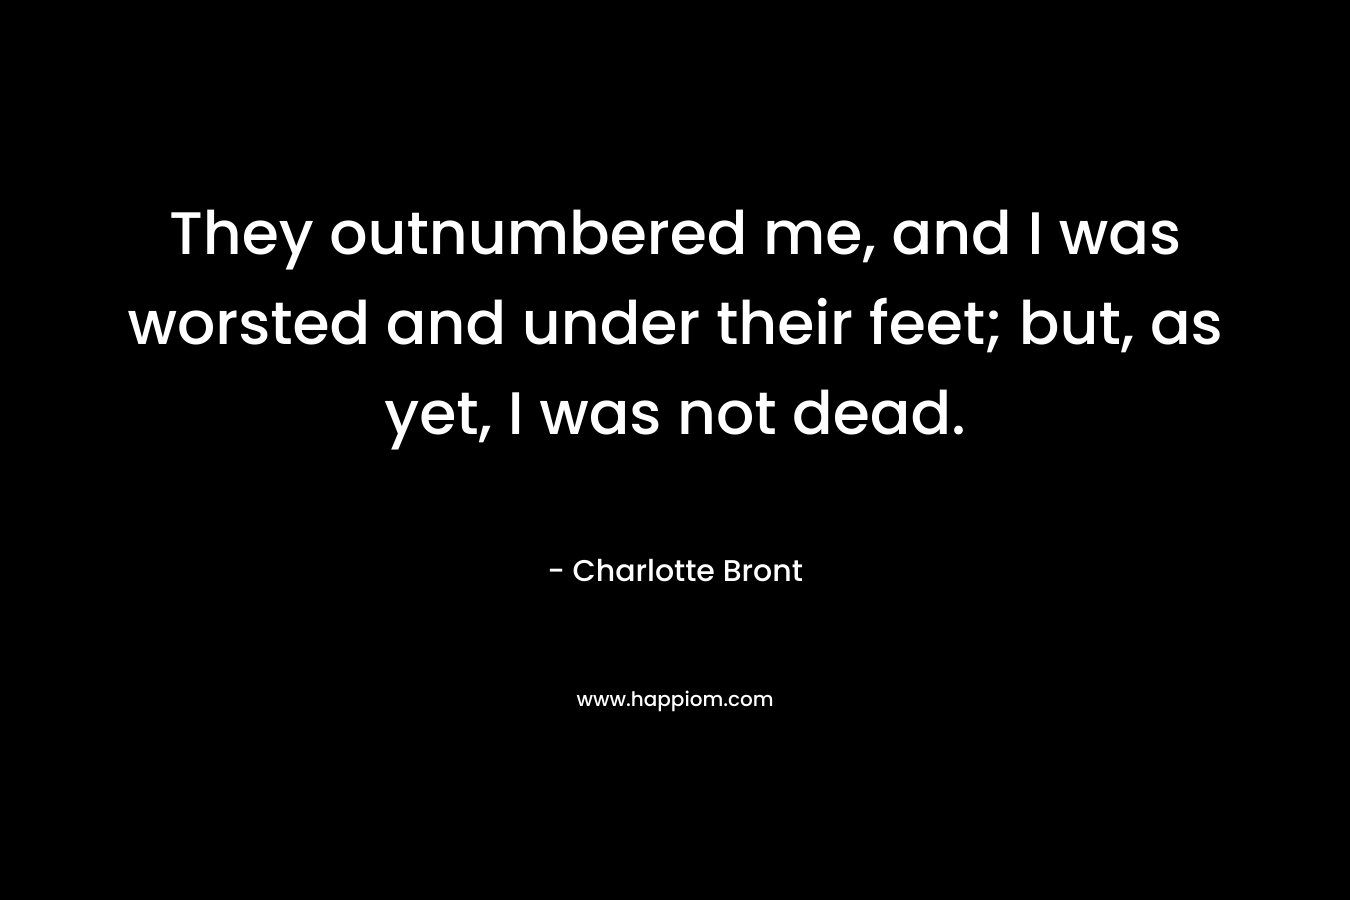 They outnumbered me, and I was worsted and under their feet; but, as yet, I was not dead. – Charlotte Bront